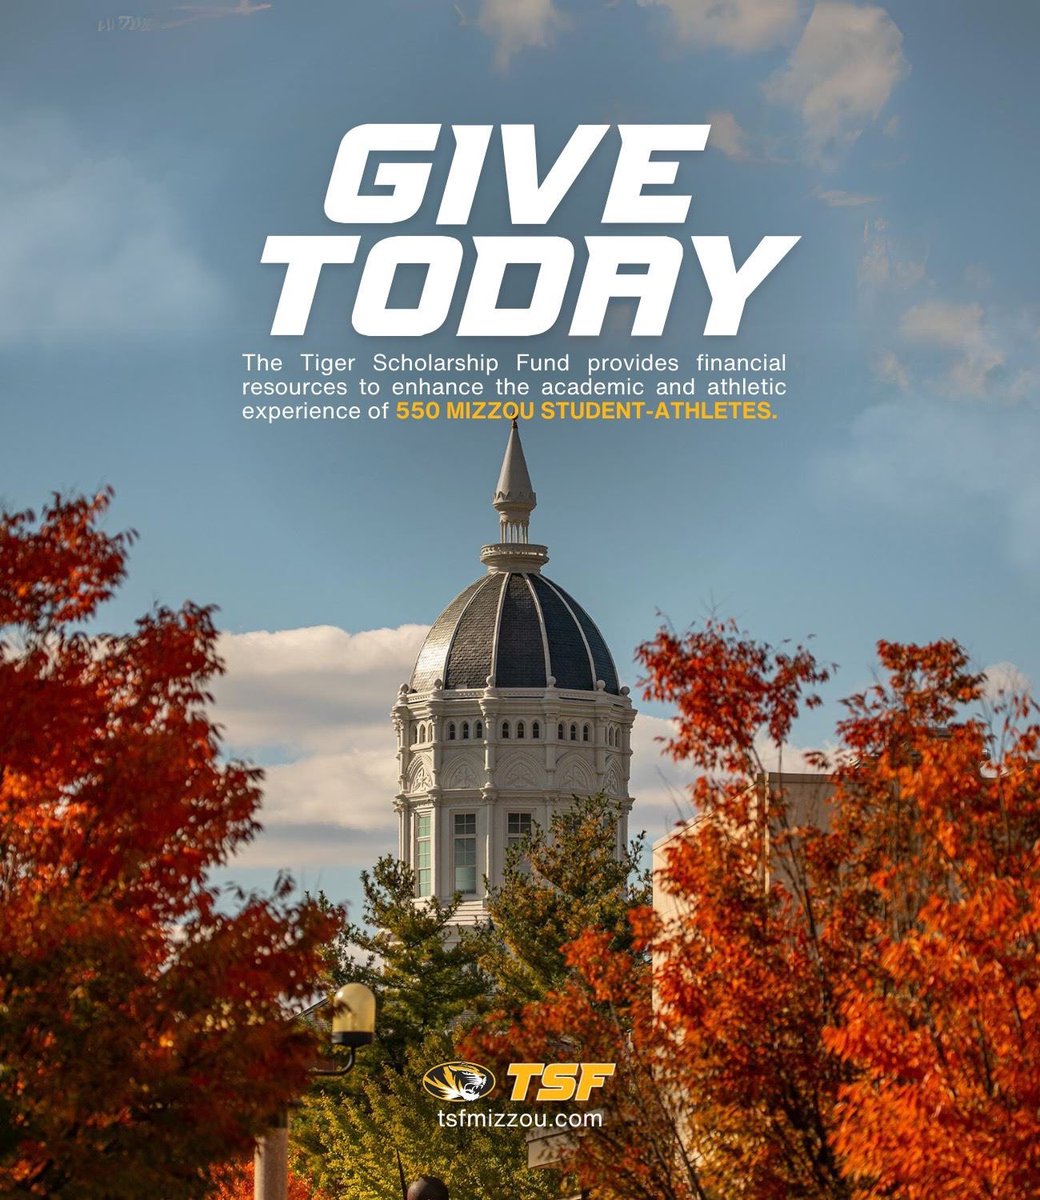 THANK YOU! Your donations support over 550 @mizzouathletics student-athletes, including me. To learn more or become a member, visit tsfmizzou.com. MIZ!